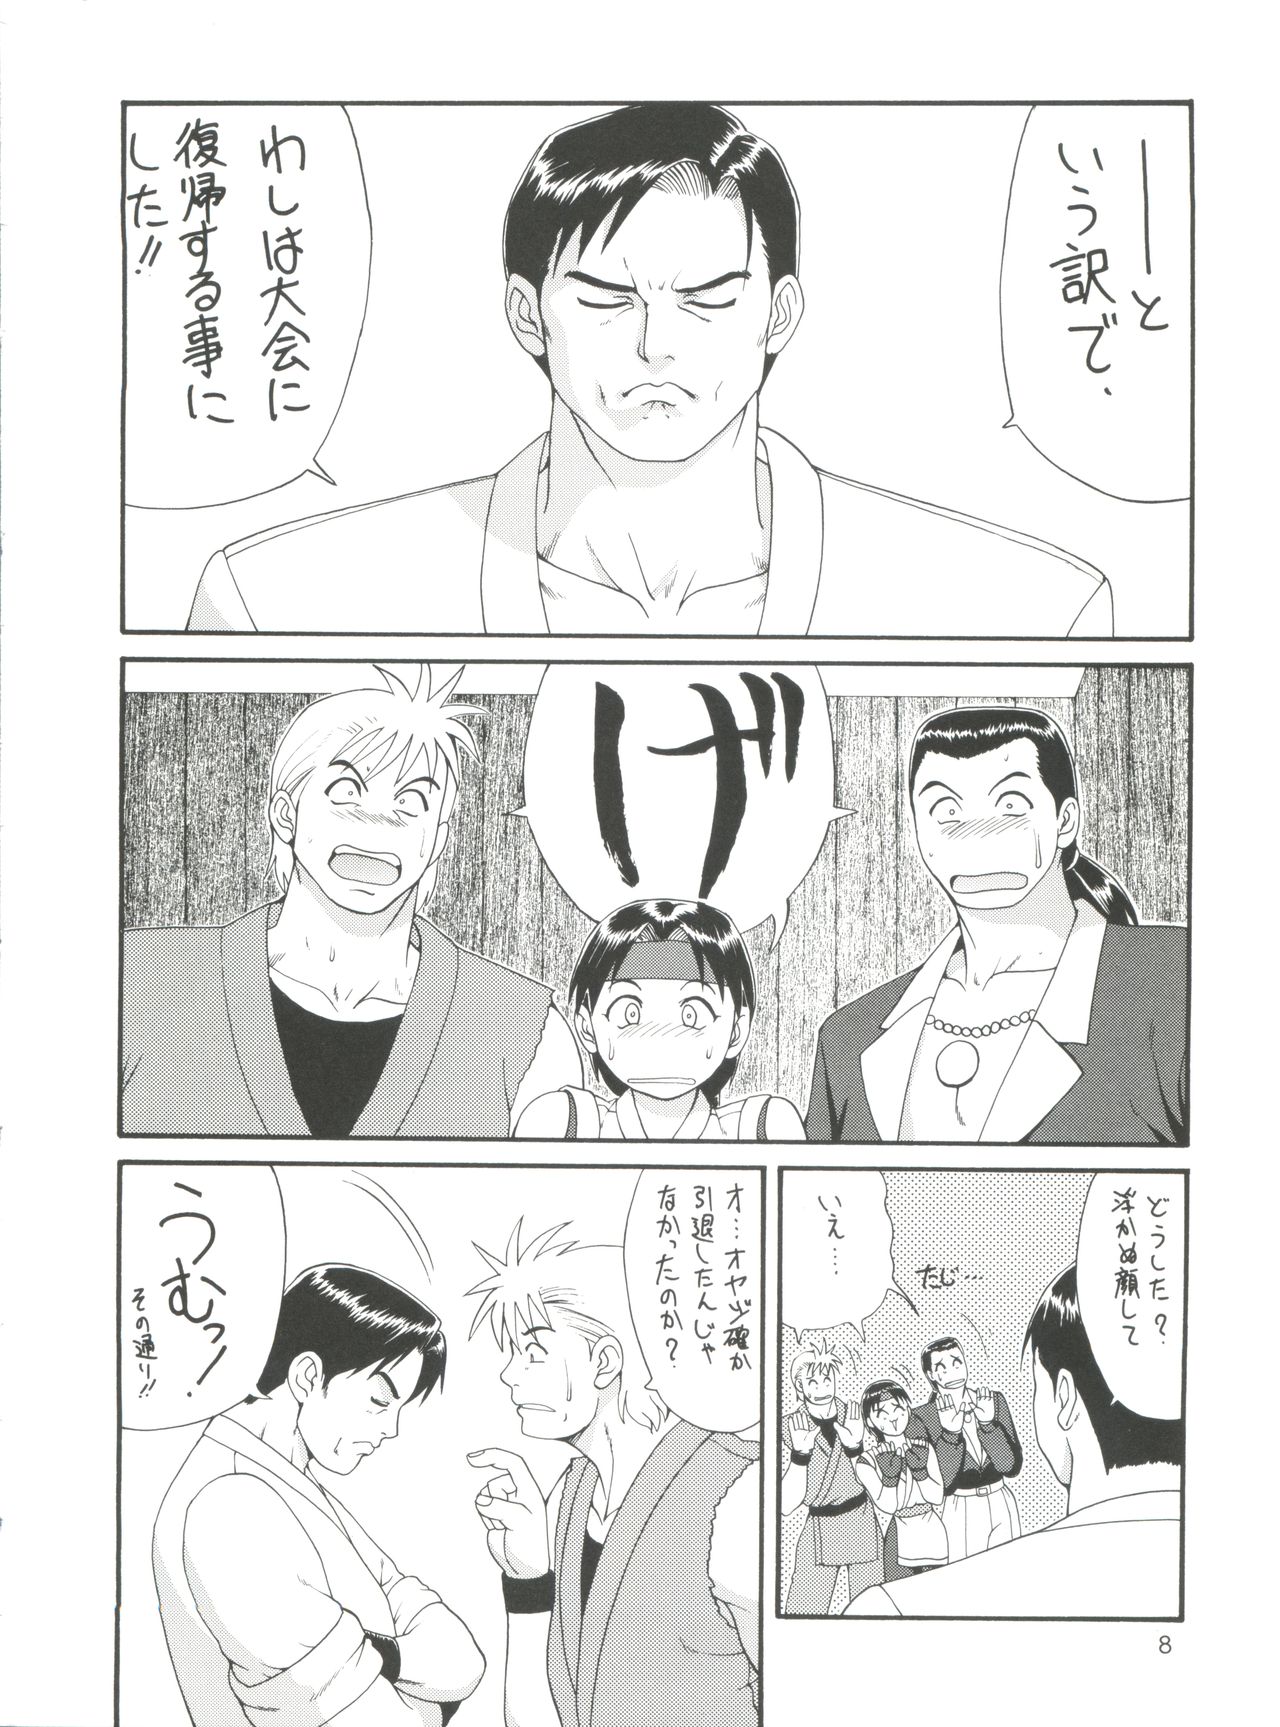 (CR24) [Saigado (Ishoku Dougen)] The Yuri & Friends '98 (King of Fighters) page 7 full